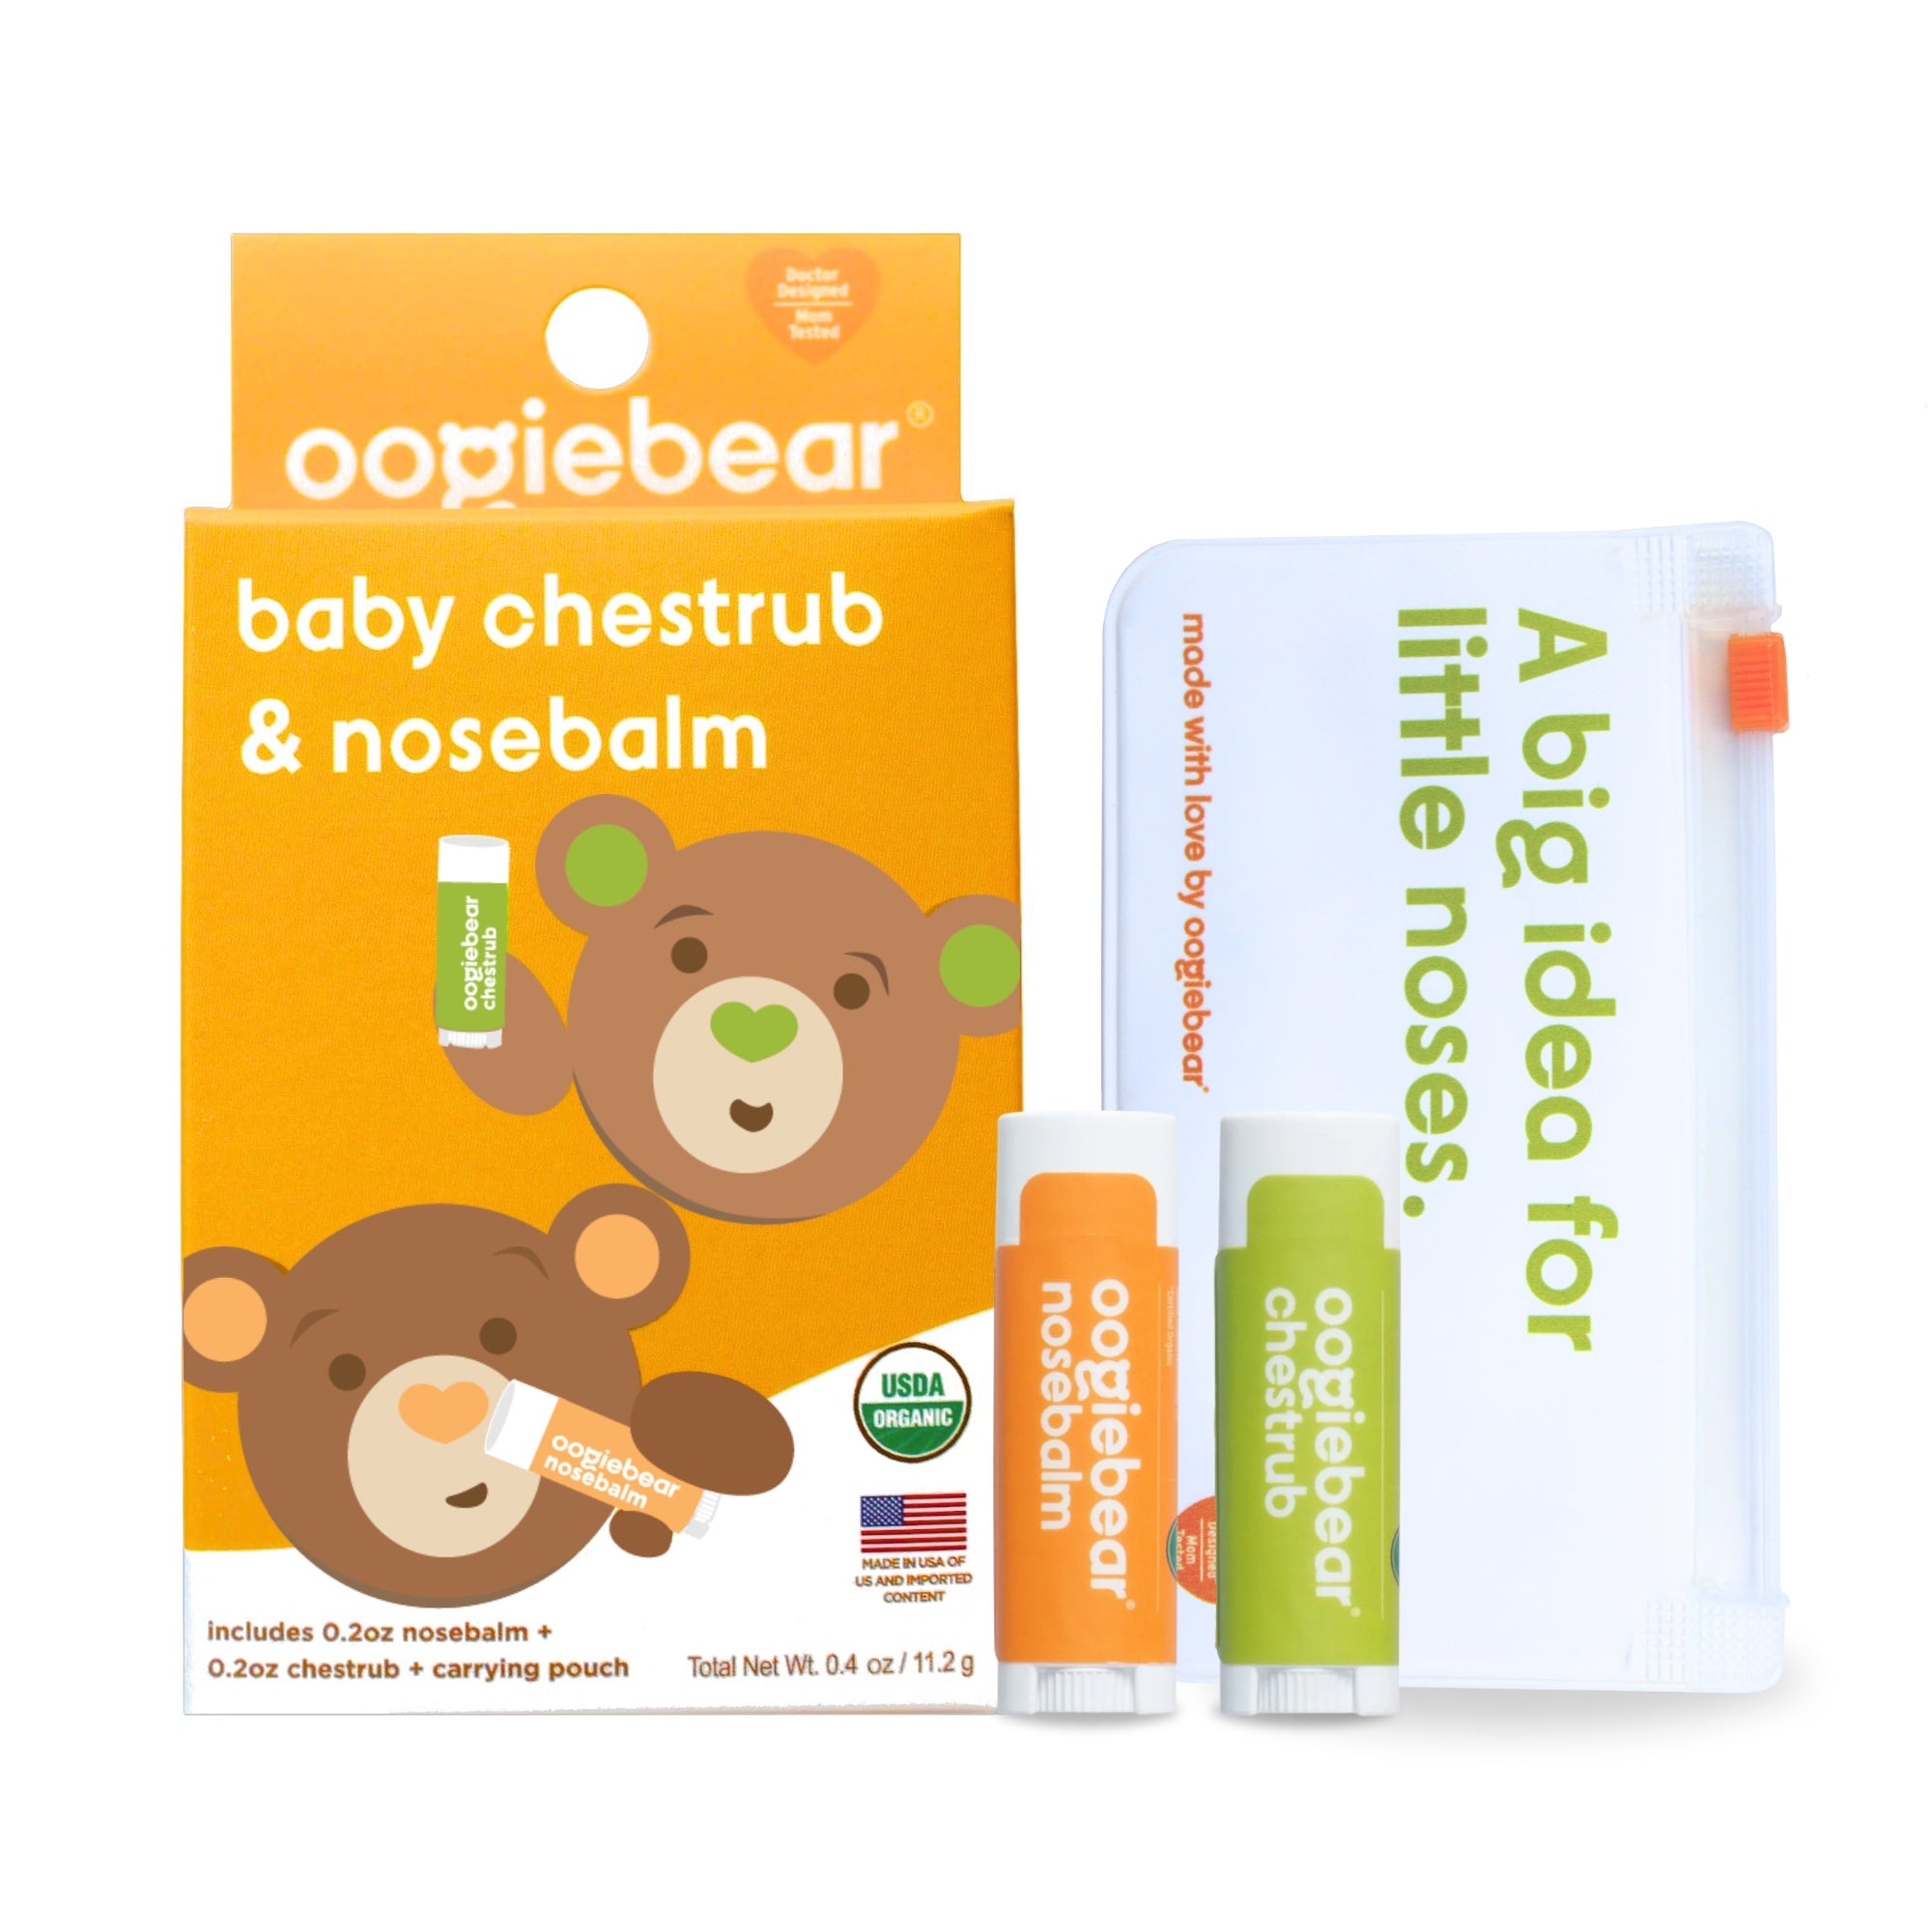 Oogiebear — The Pure Parenting Shop